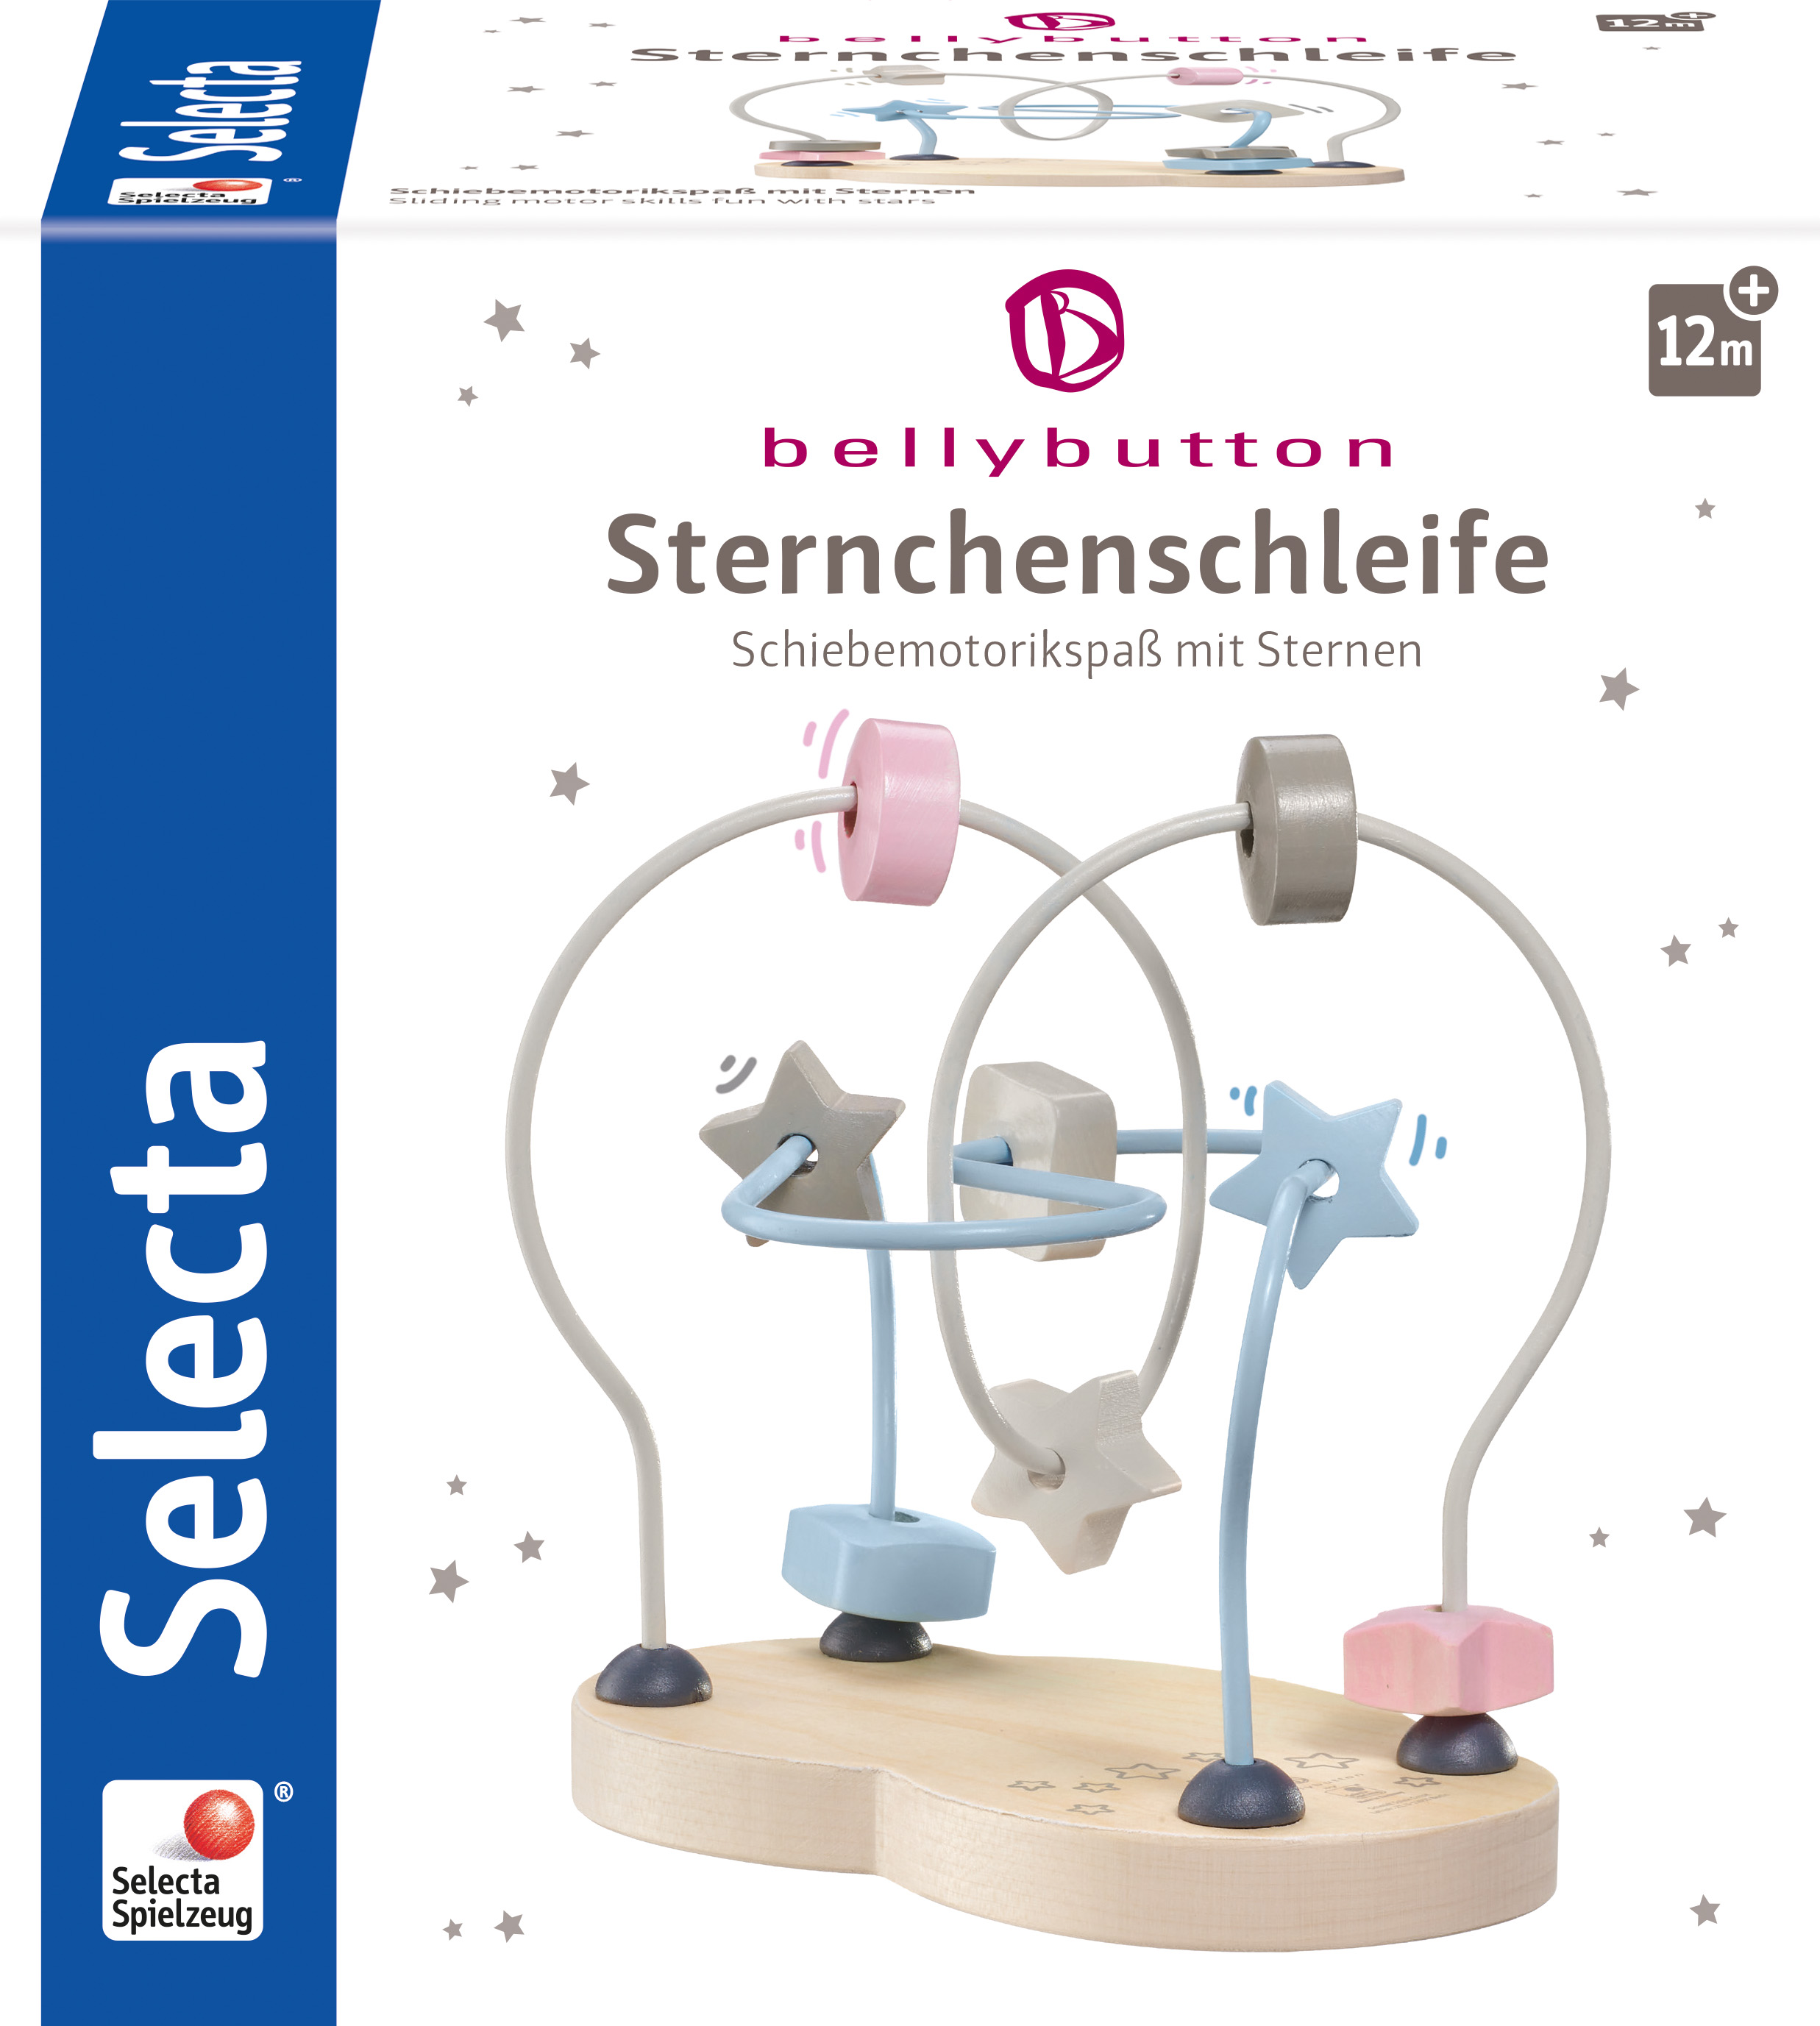 SELECTA bellybutton by Selecta® - 18 Holzspielzeug cm Sternchenschleife, nein